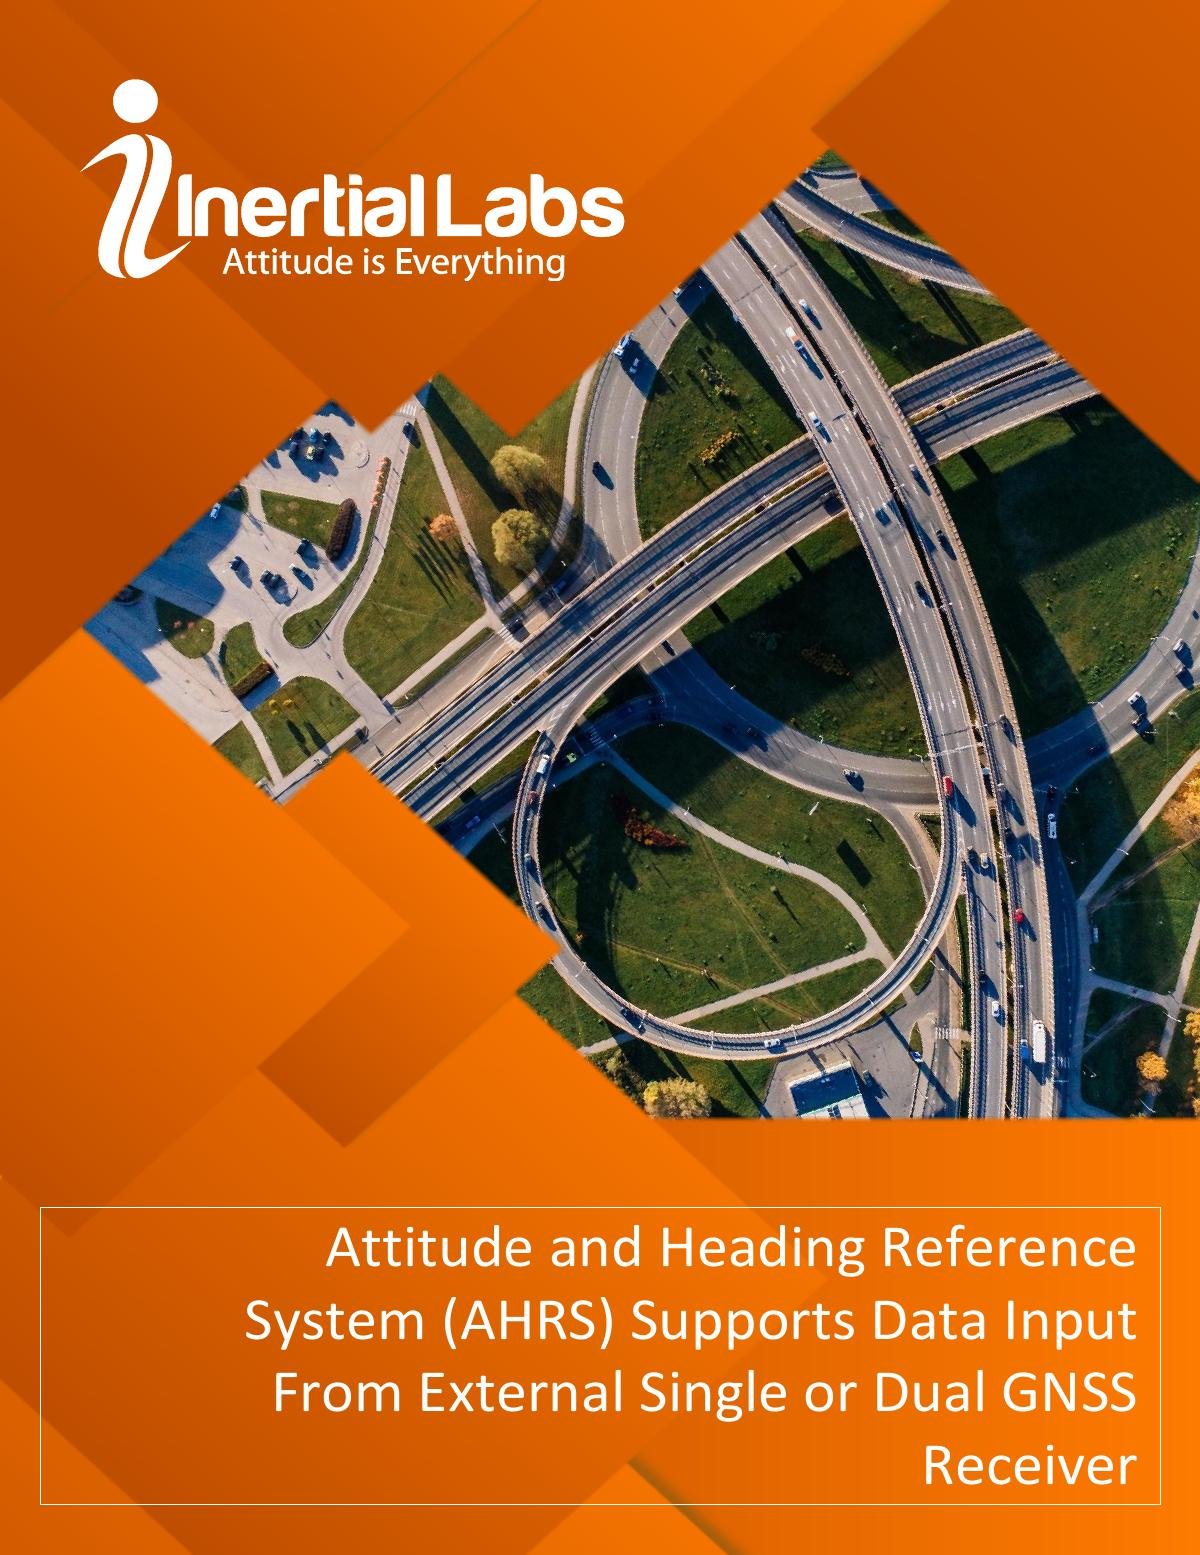 Attitude and Heading Reference System (AHRS) Supports Data Input From External GNSS Receivers